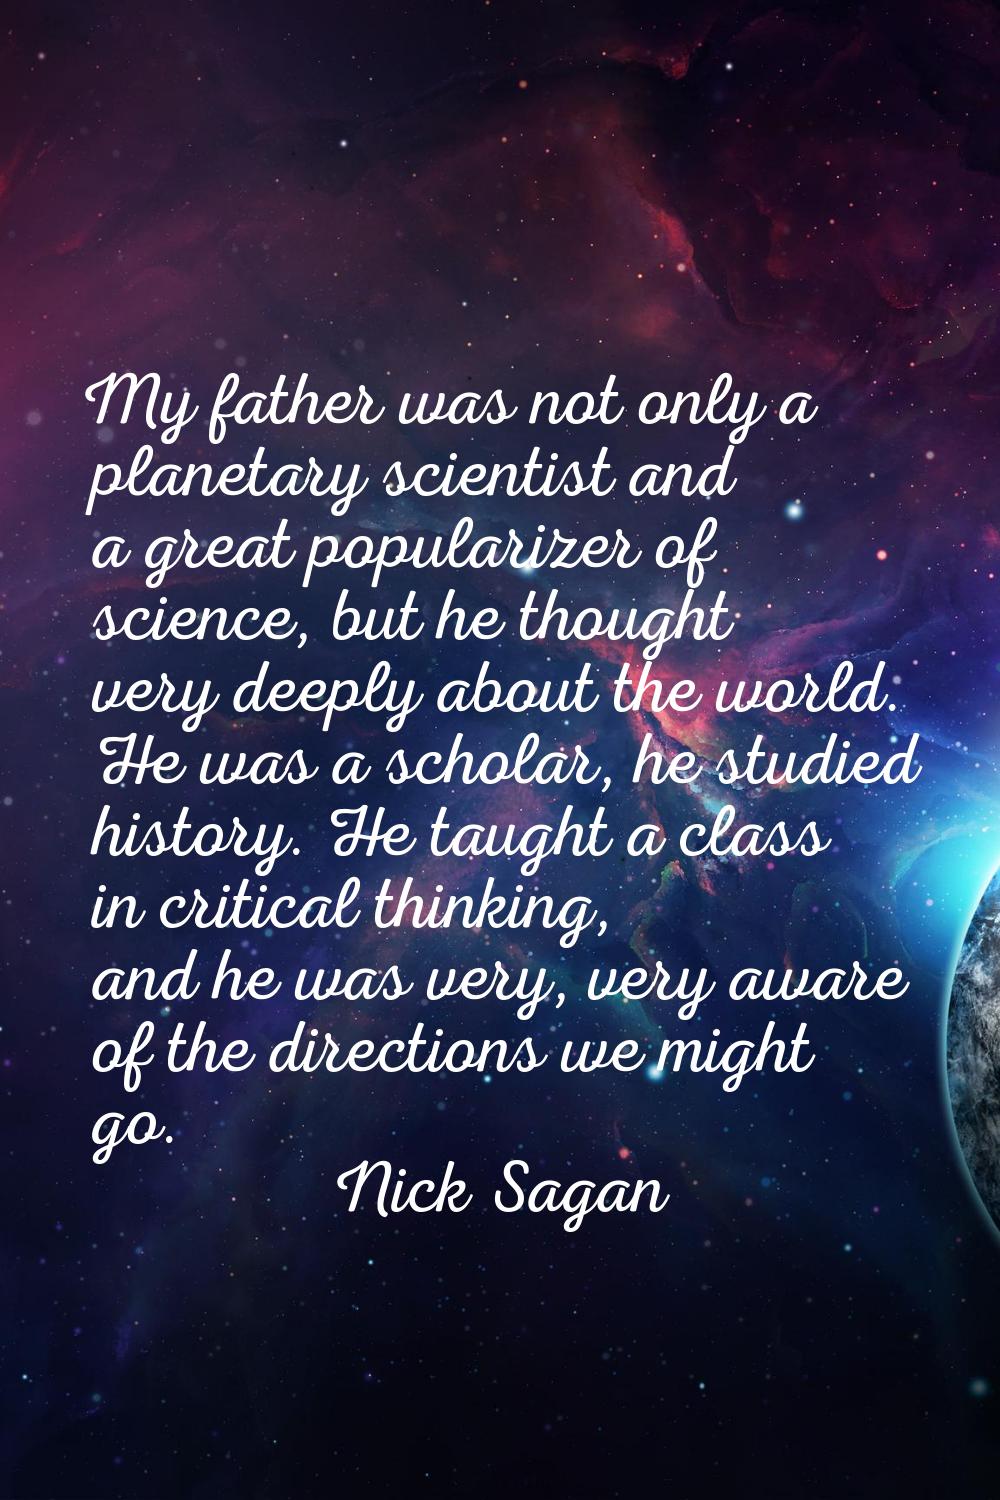 My father was not only a planetary scientist and a great popularizer of science, but he thought ver